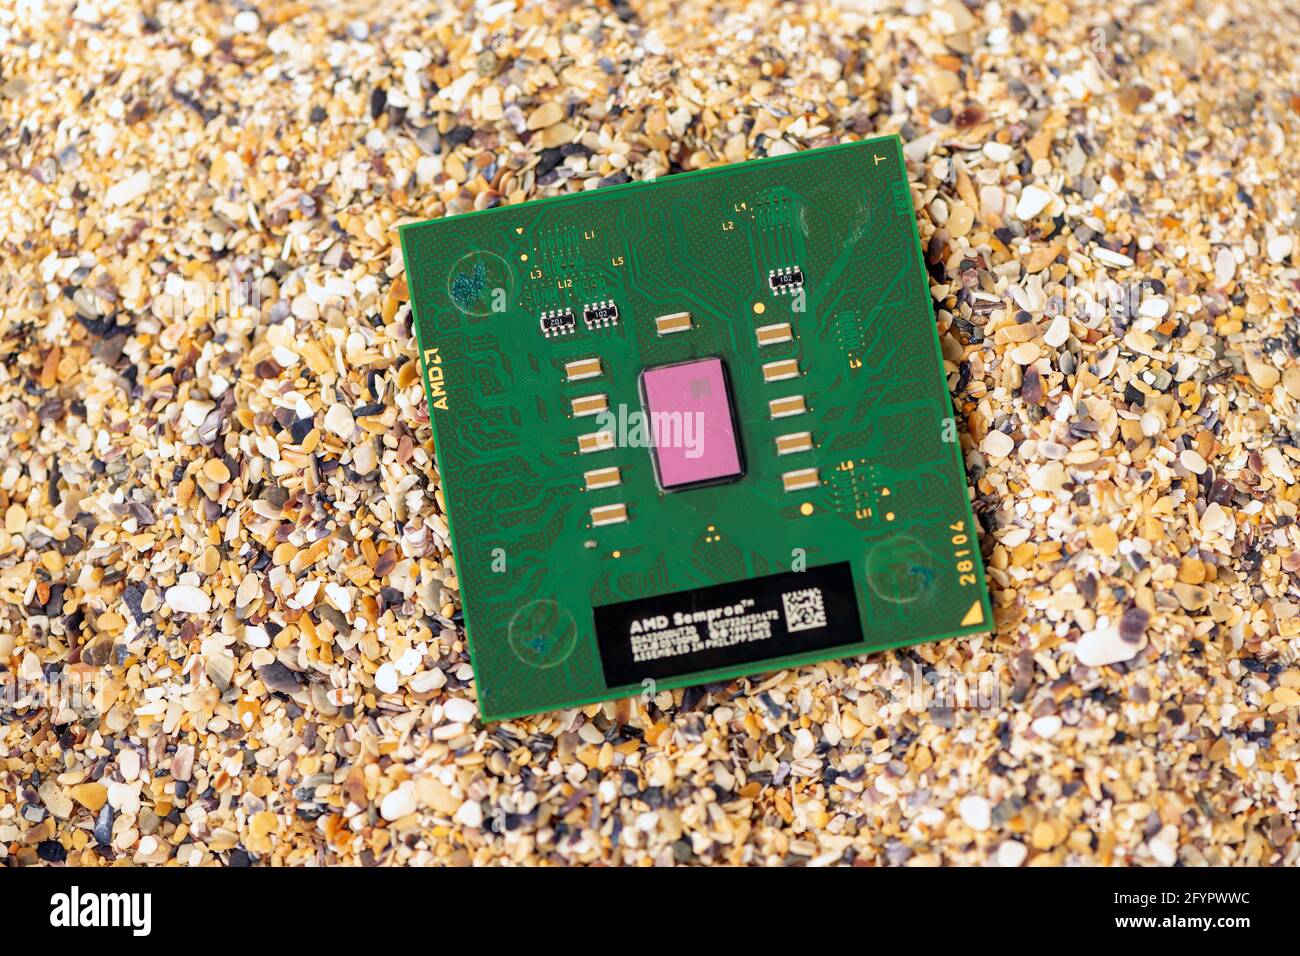 Timisoara, Romania - October 18, 2020: Close-up of an AMD Sempron 2200+  SDA2200DUT3D processor, 2200 MHz, socket A with sand in the background  Stock Photo - Alamy